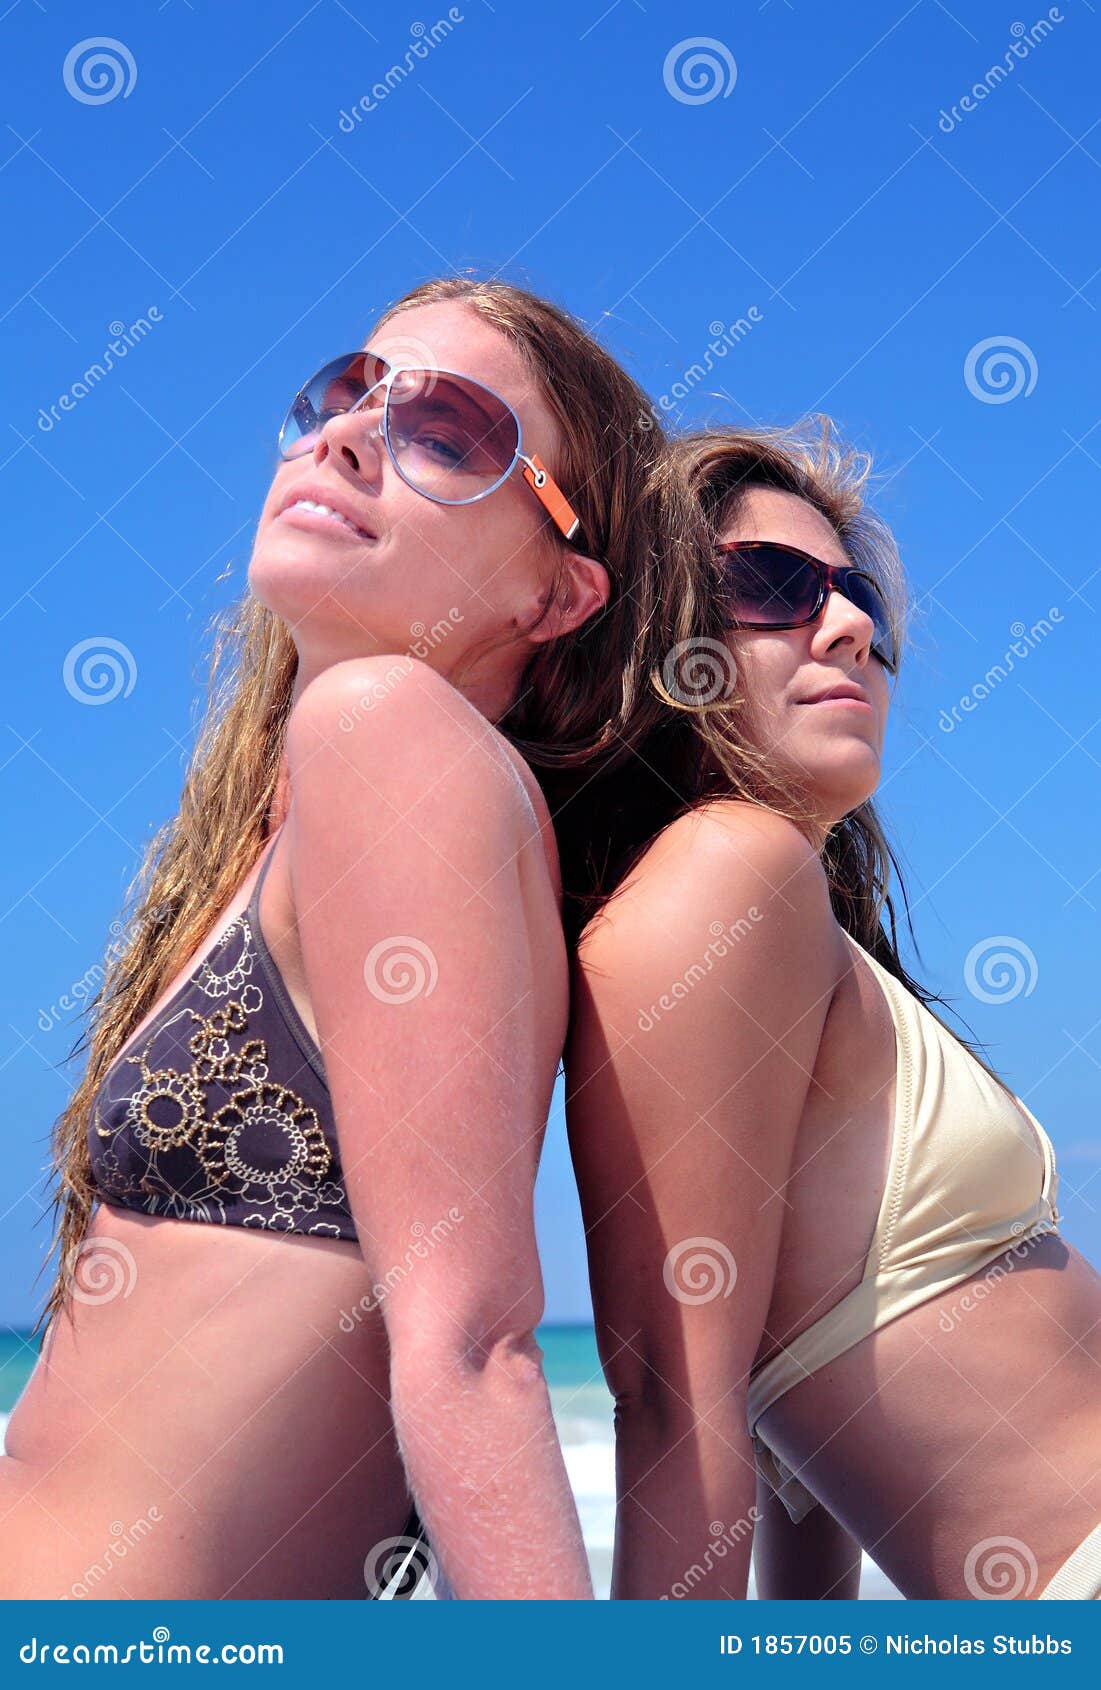 Two Young Attractive Women Chilling in the Sun on Holiday or Vac Stock Image pic pic